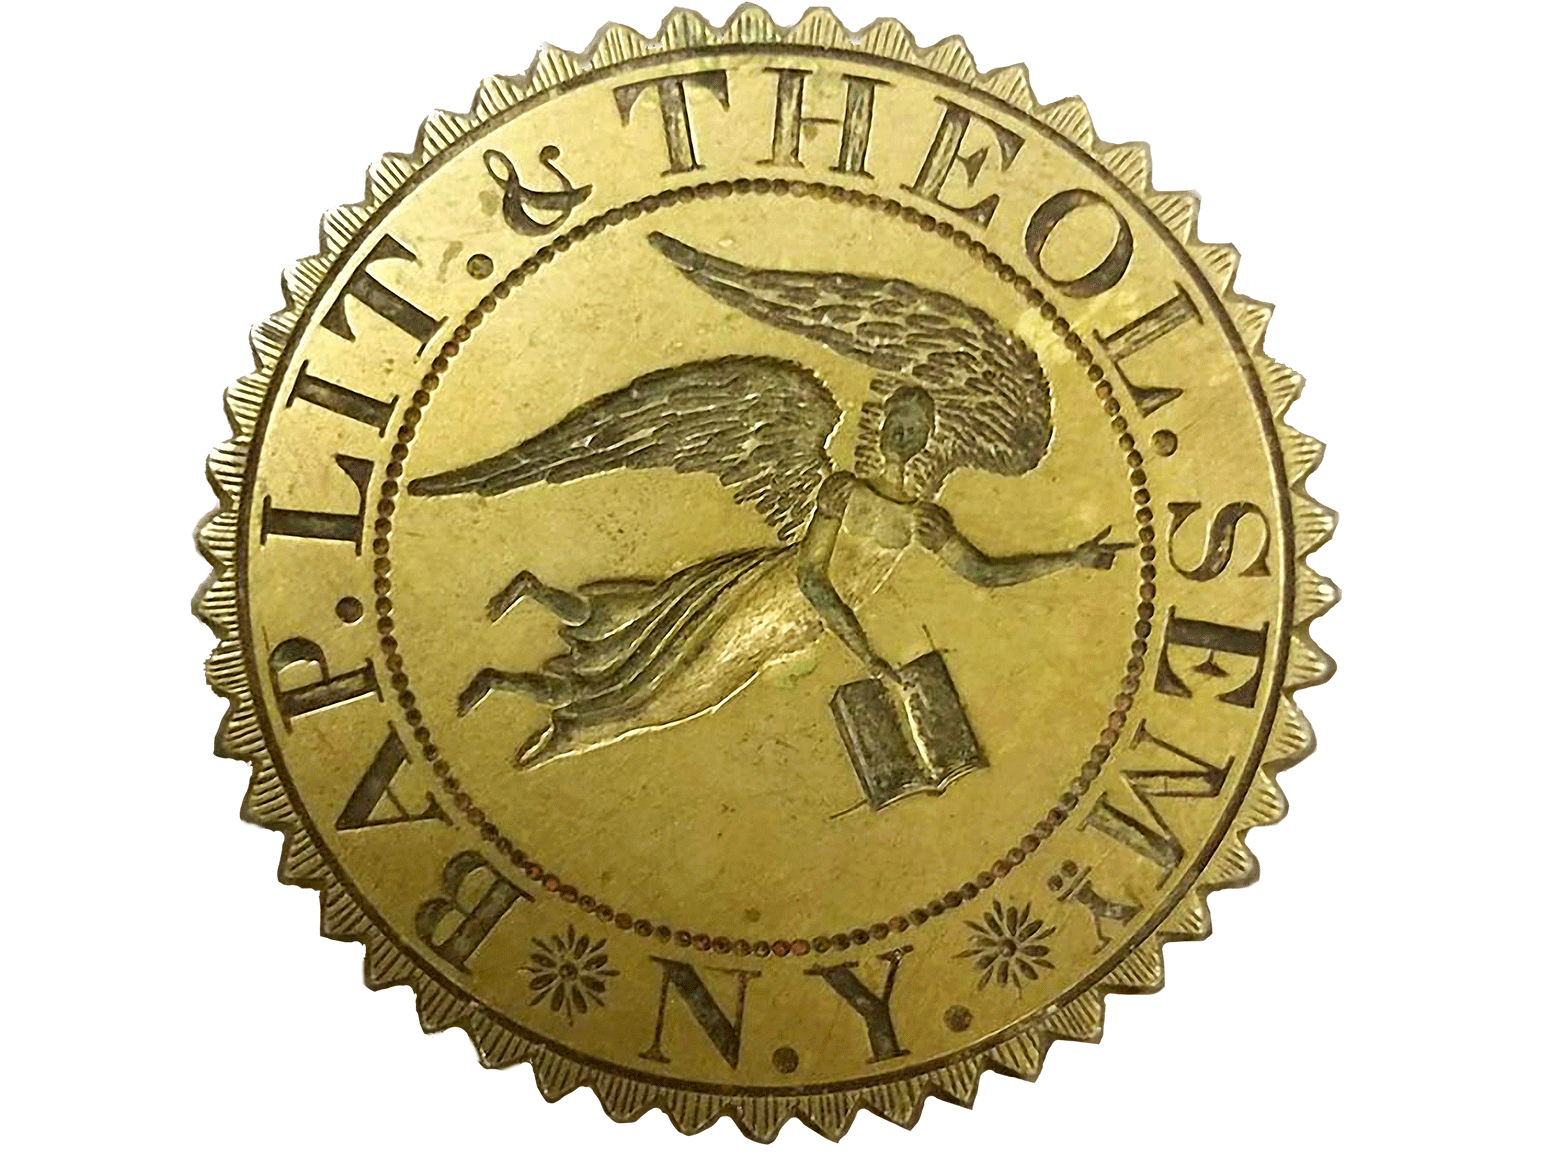 seal with inscription "Baptist Literary and Theological Seminary"